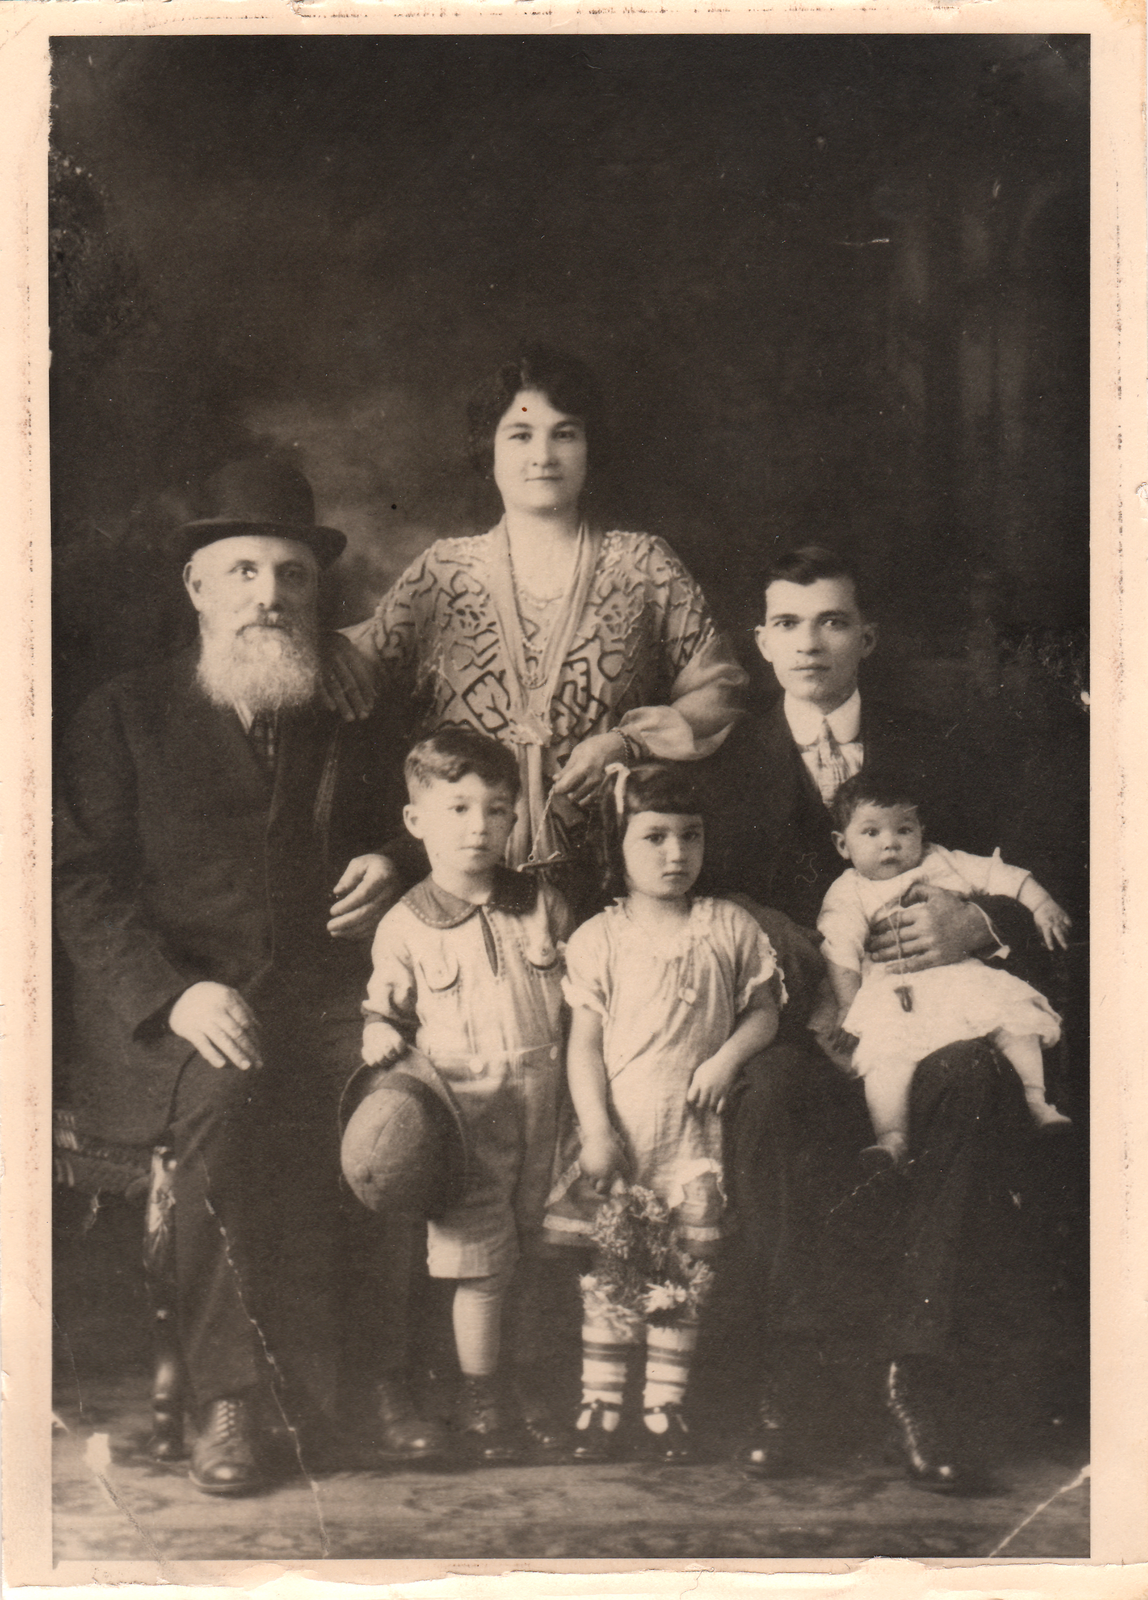 Grandfather Yosef, mother Dona, father Judah, brother Sam, Becky, and sister Nellie.